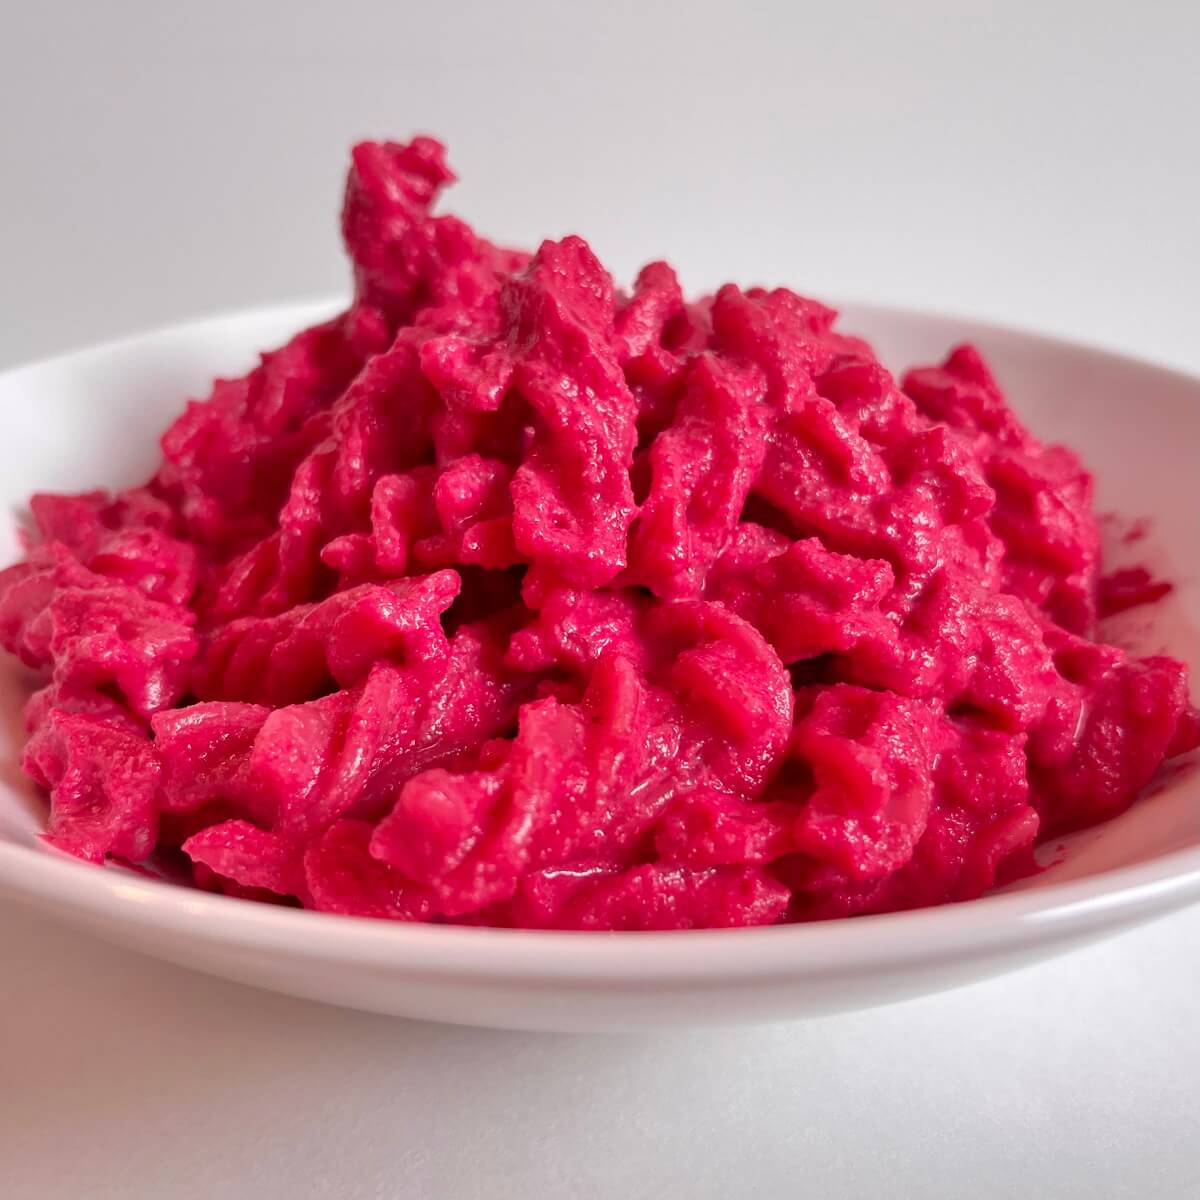 A dish of pasta covered in a thick, pink sauce.